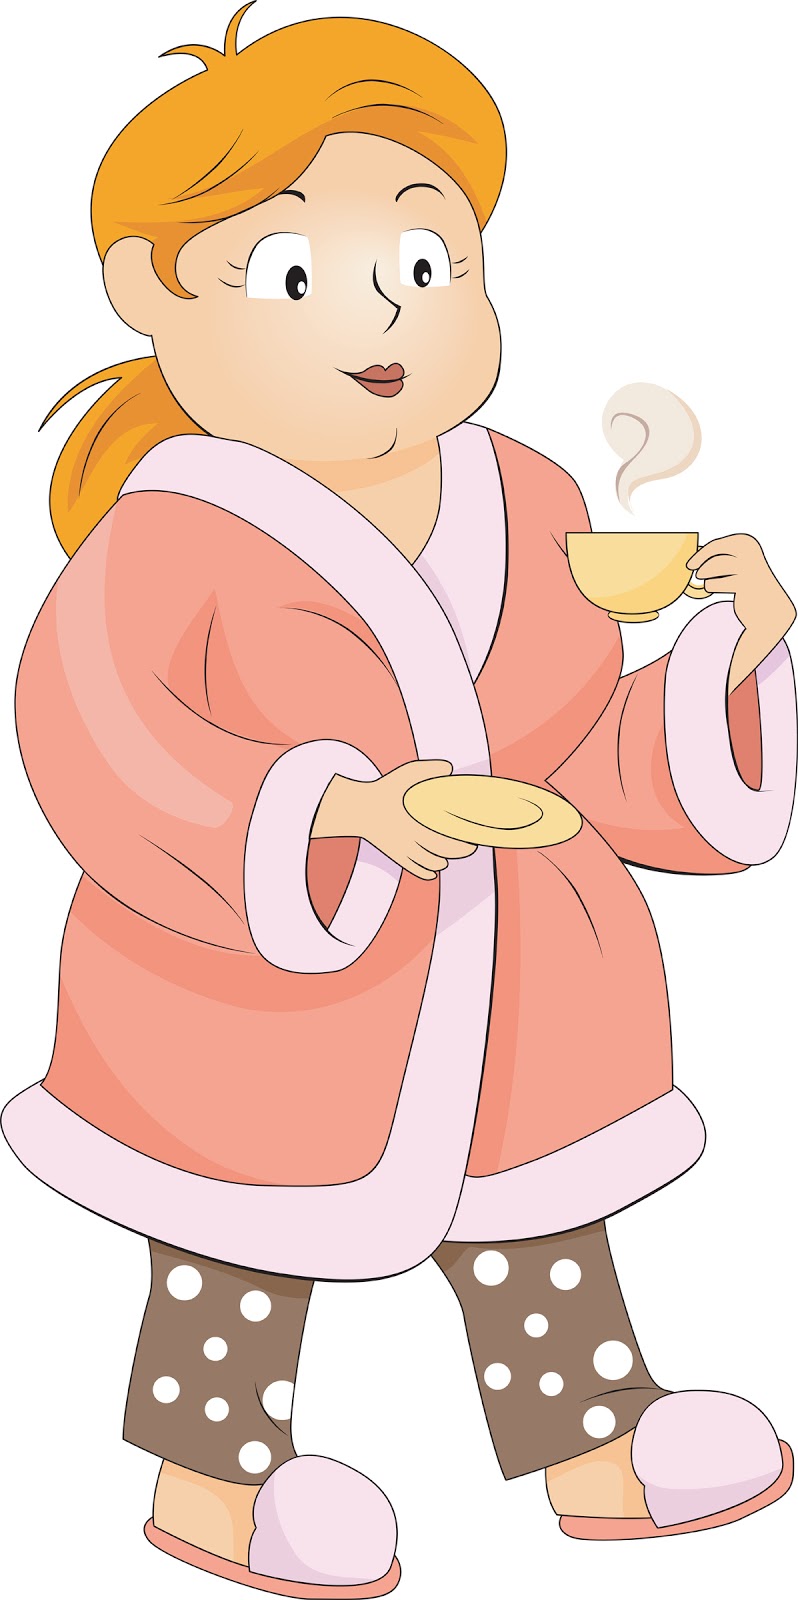 Put On Pajamas Clipart Another Thing I Have To Change